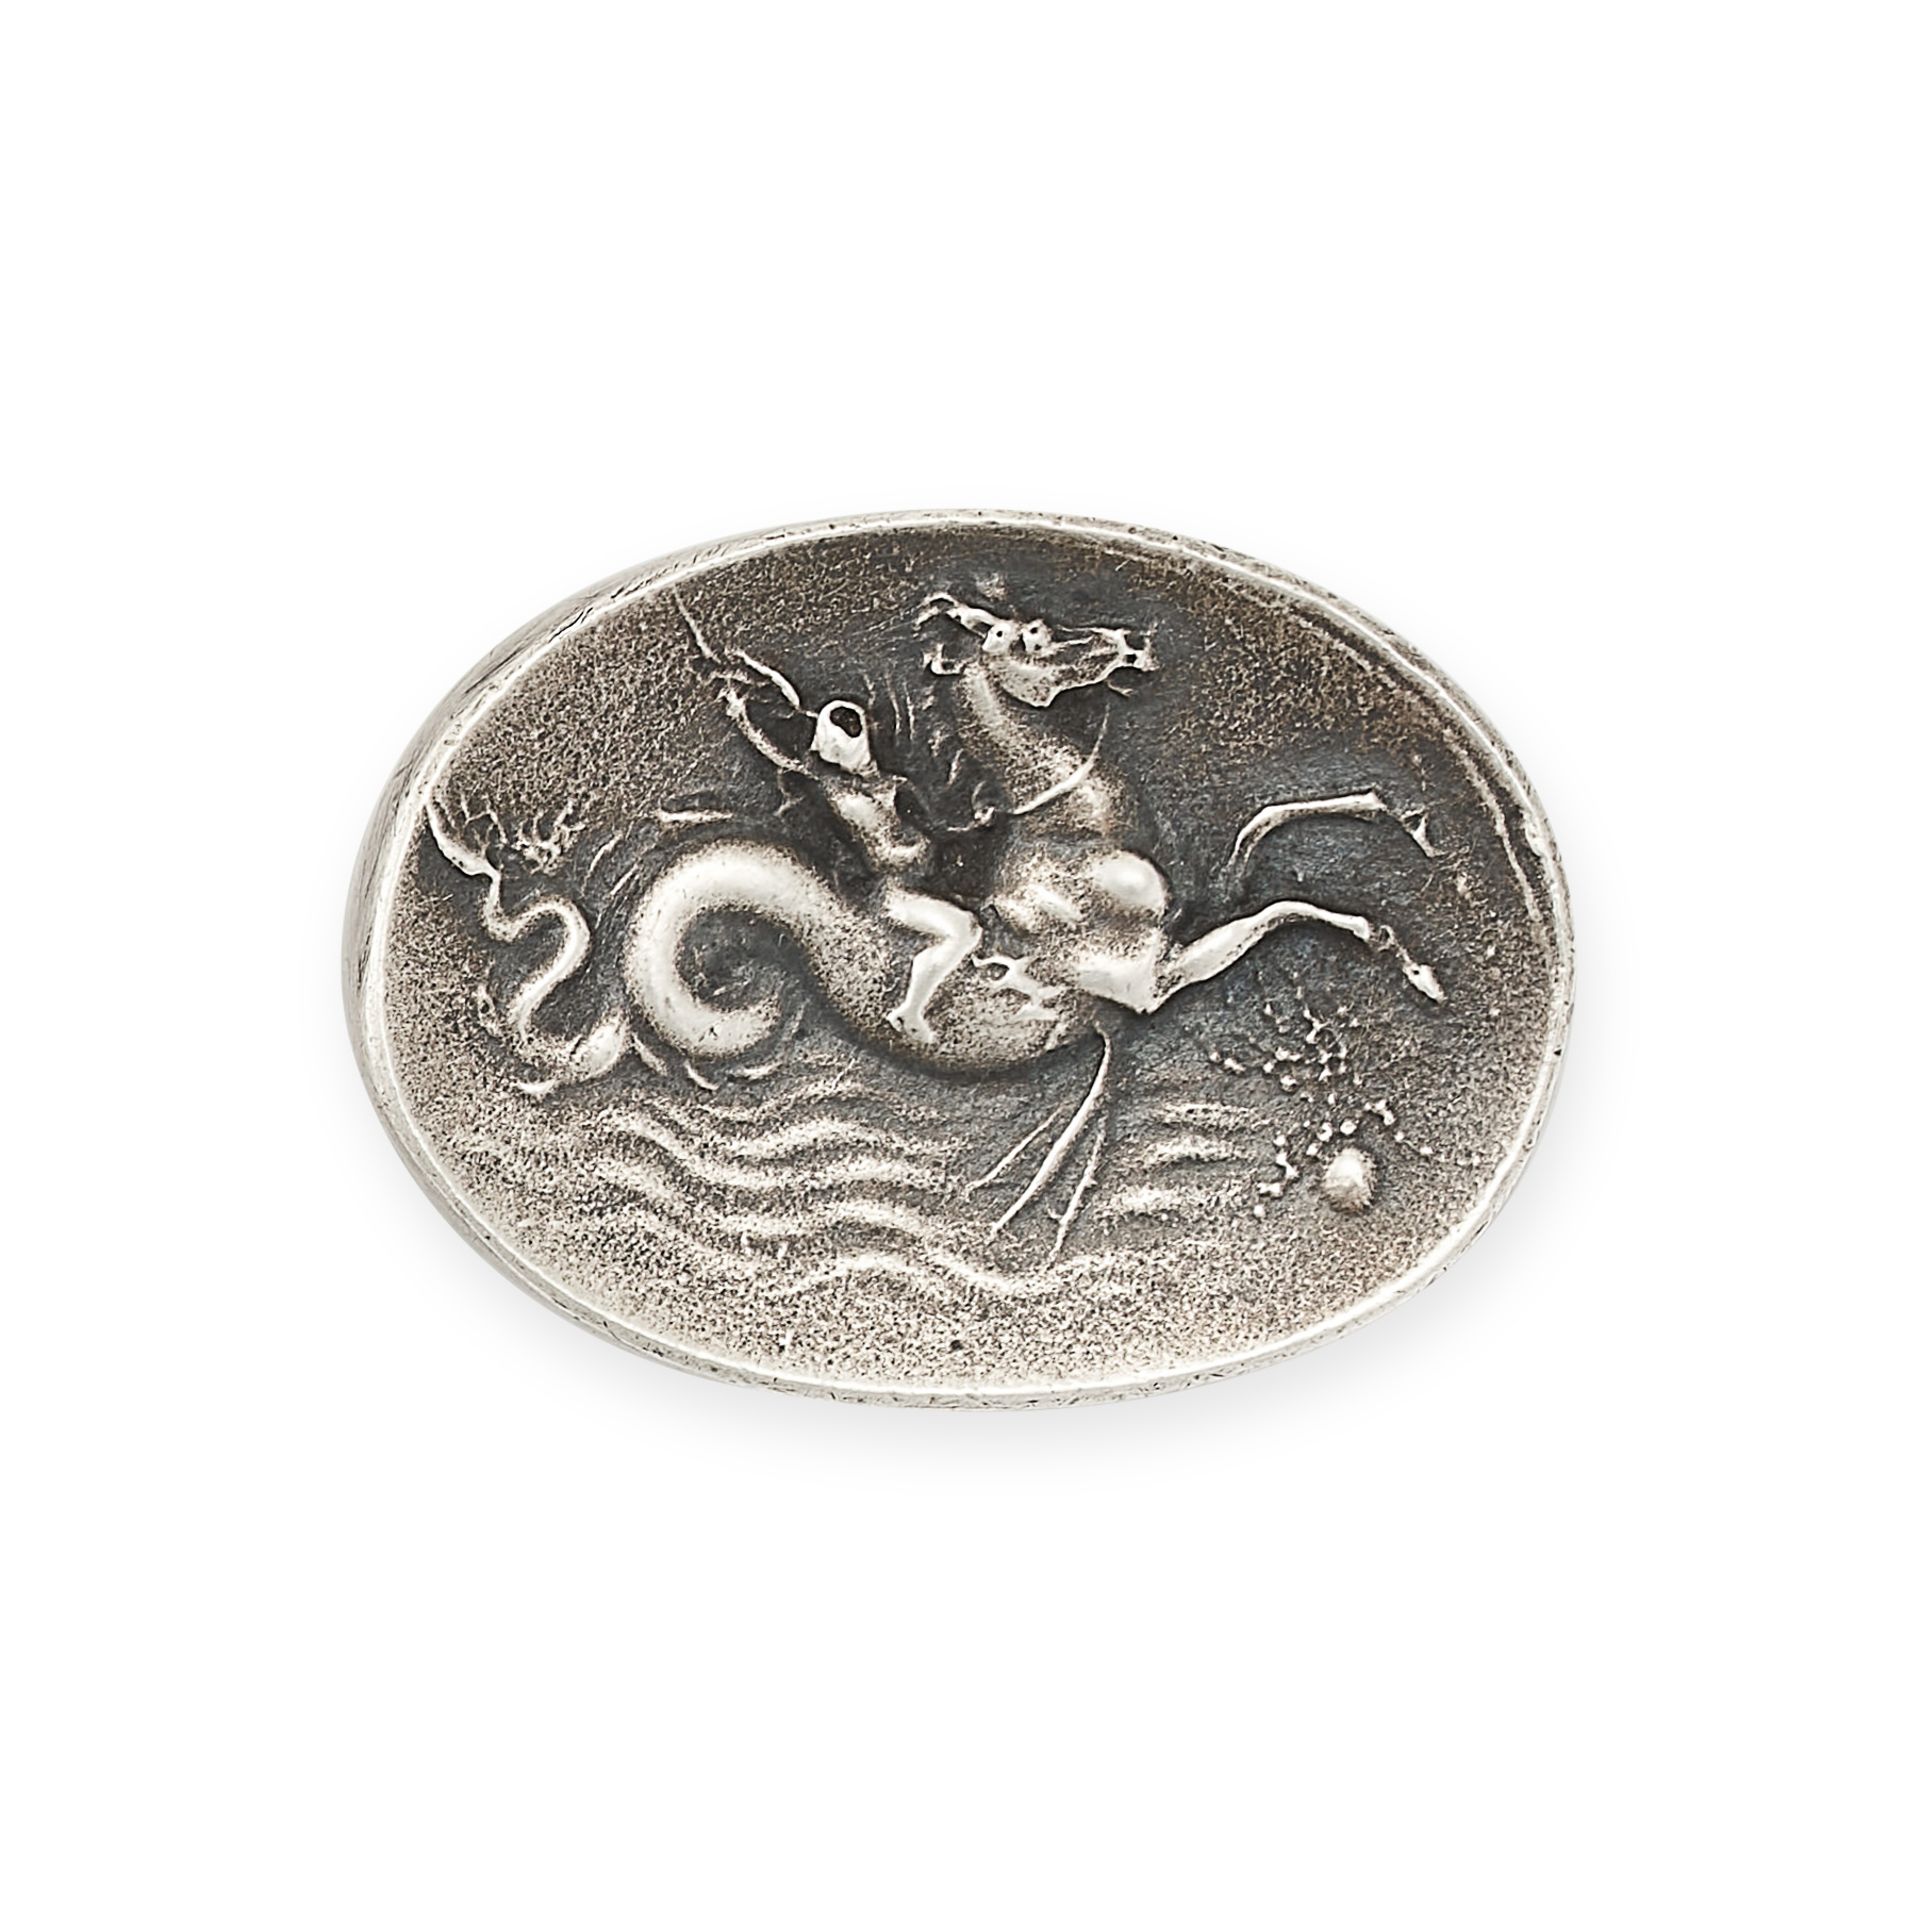 NO RESERVE - A SILVER CAMEO depicting Cupid riding a seahorse, 1.6cm, 7.0g.